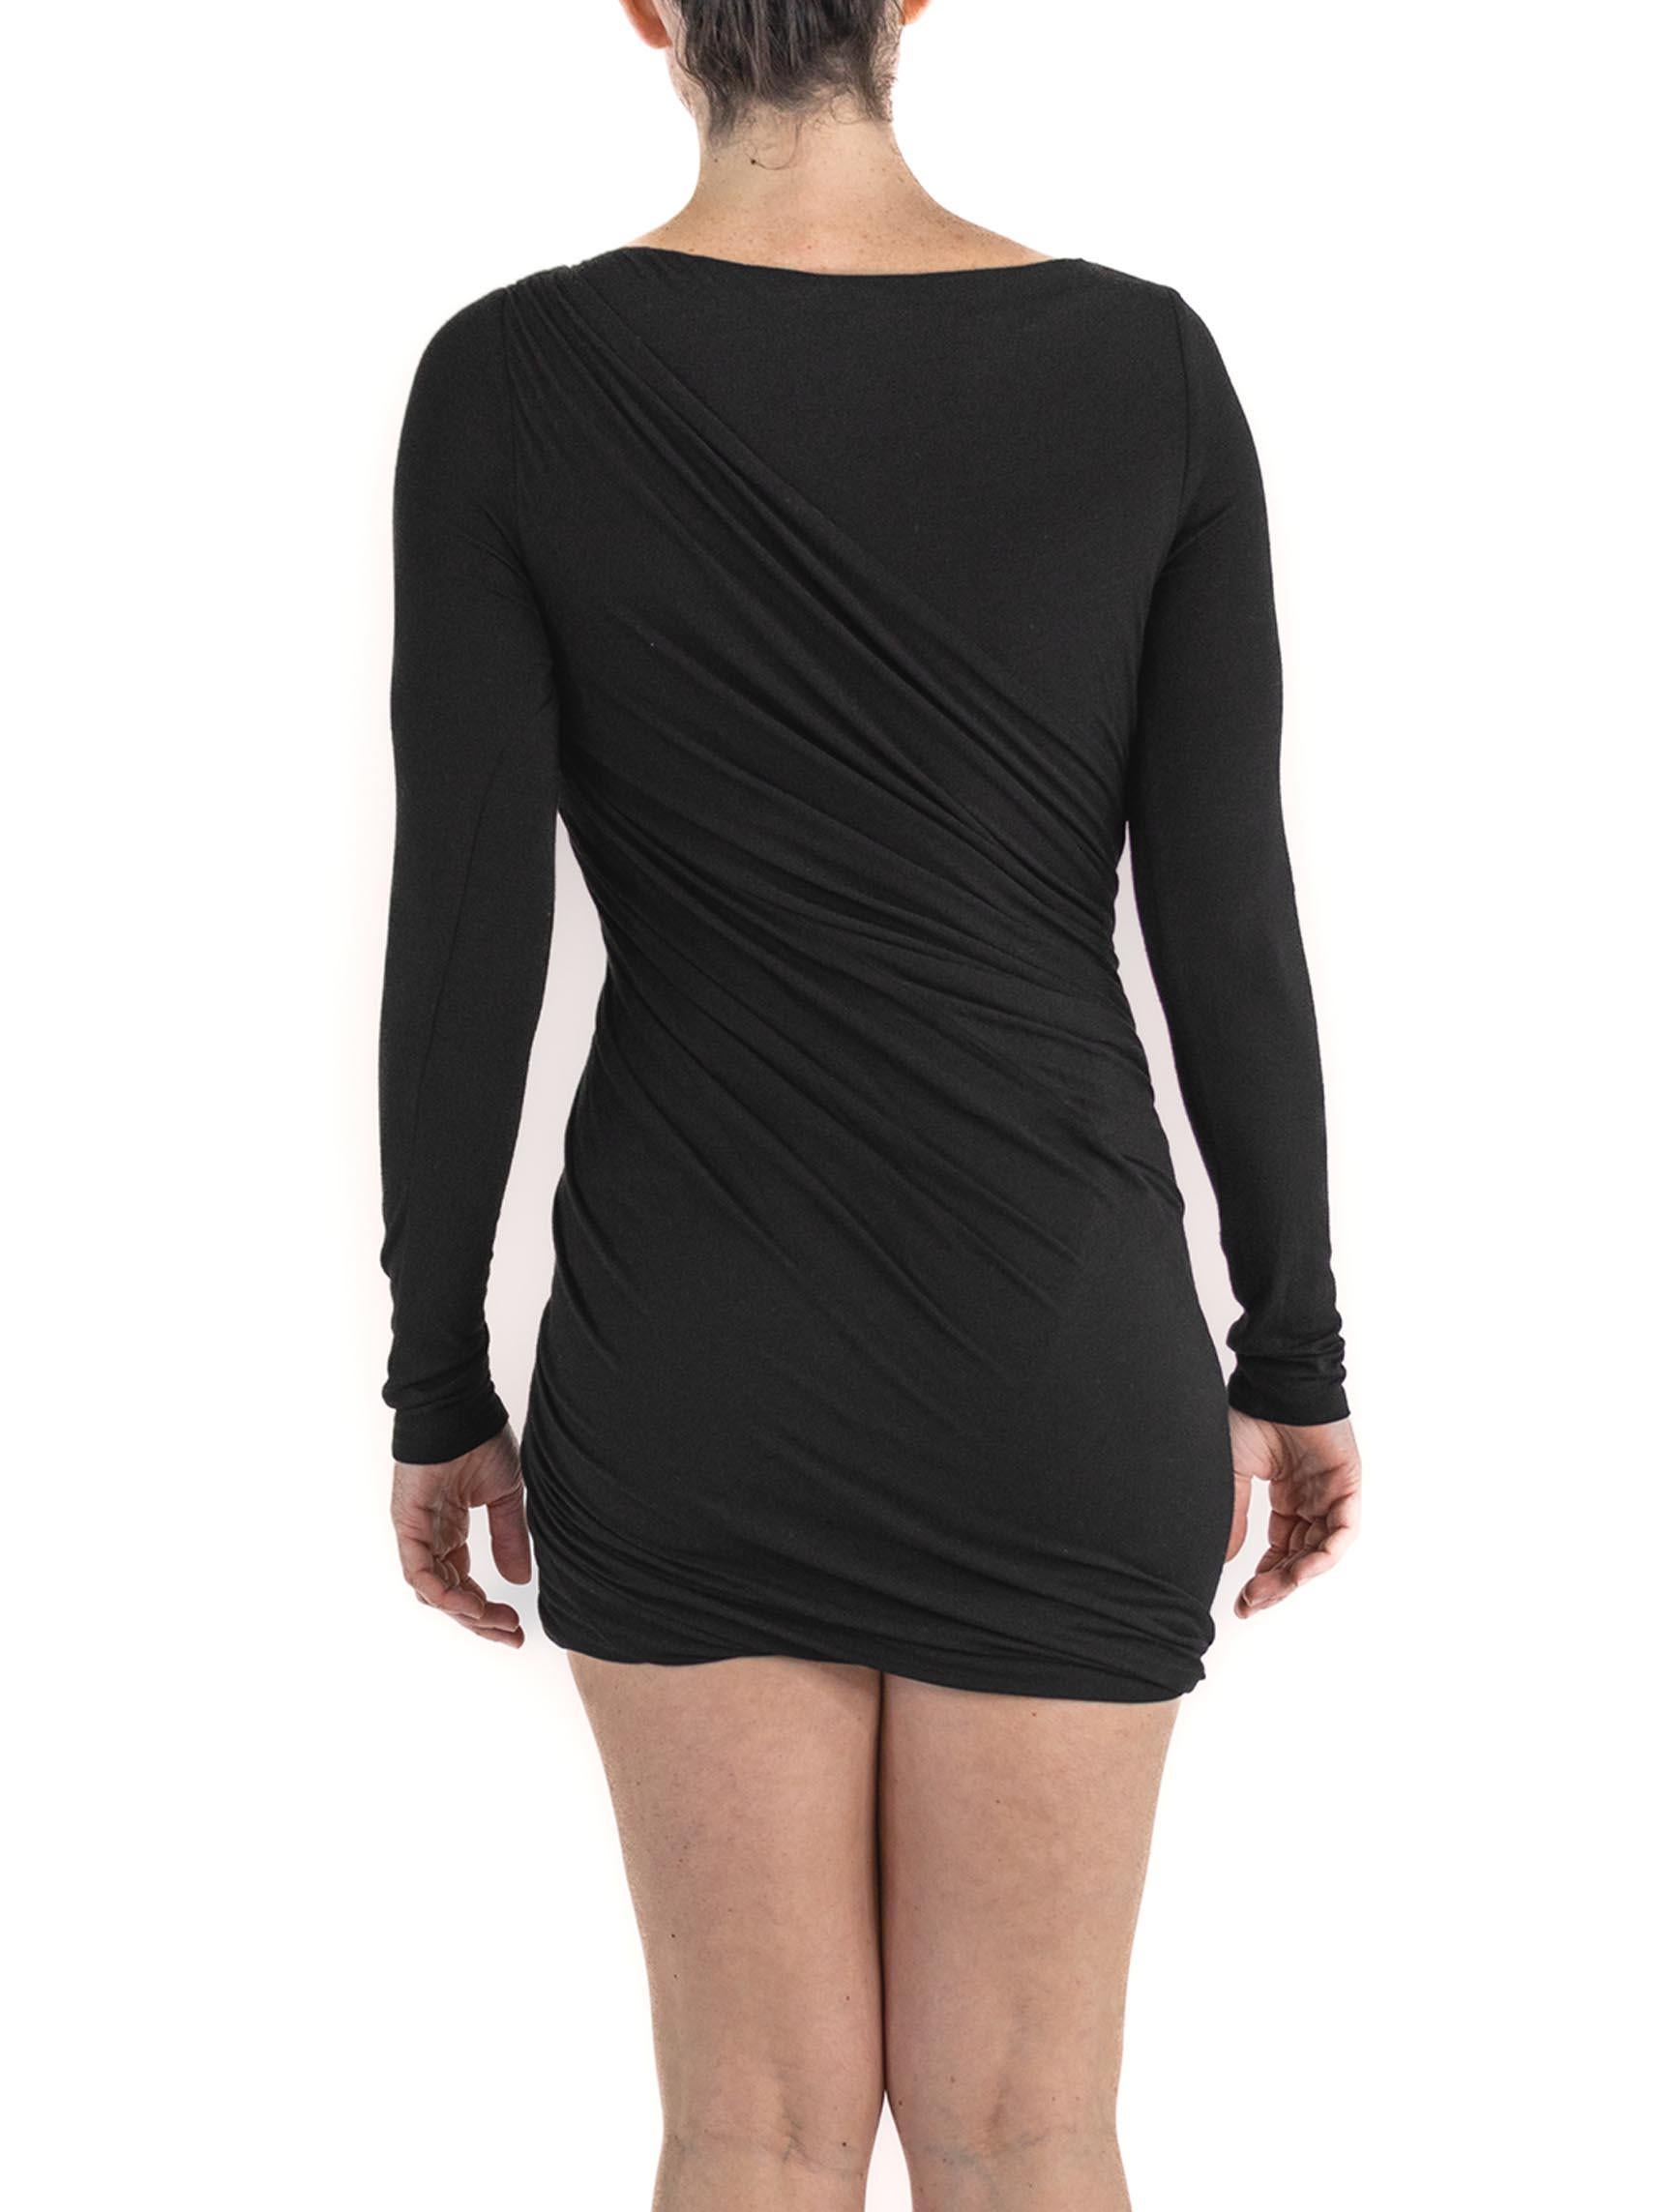 2000S DONNA KARAN Black Rayon Jersey Dress With Sleeves For Sale 2